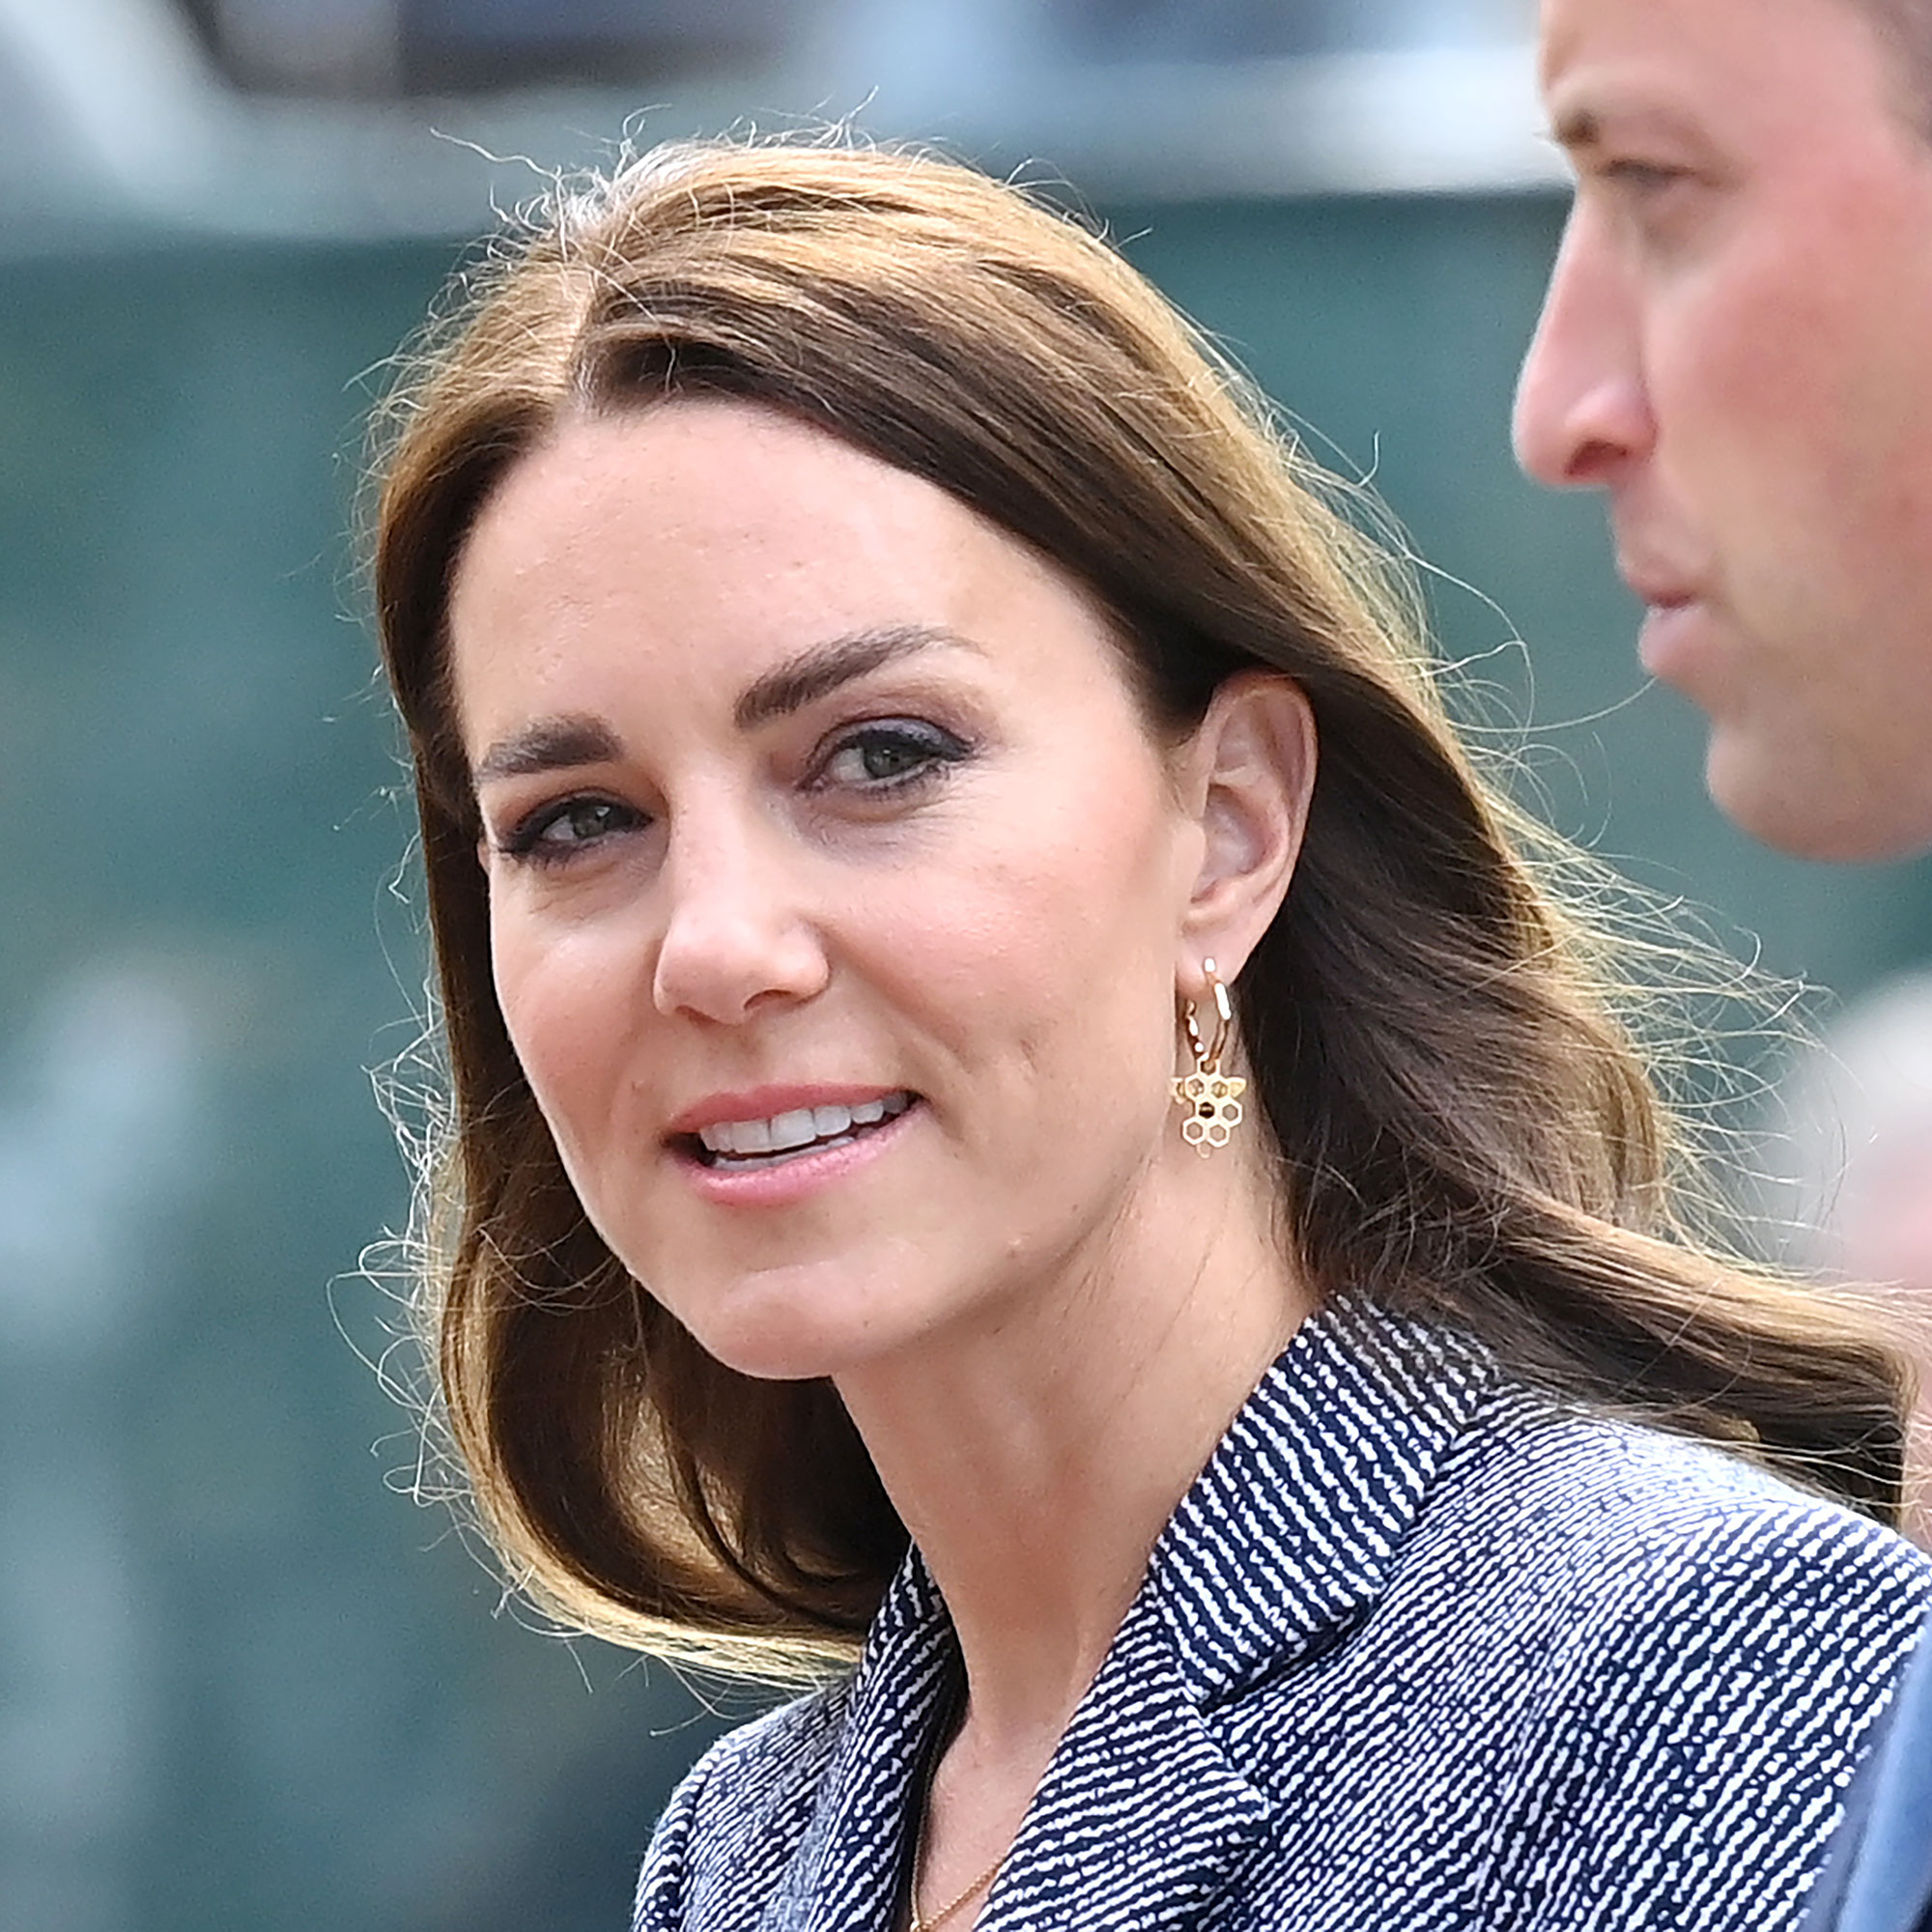 Kate Middleton honors Manchester attack victims with bee earrings